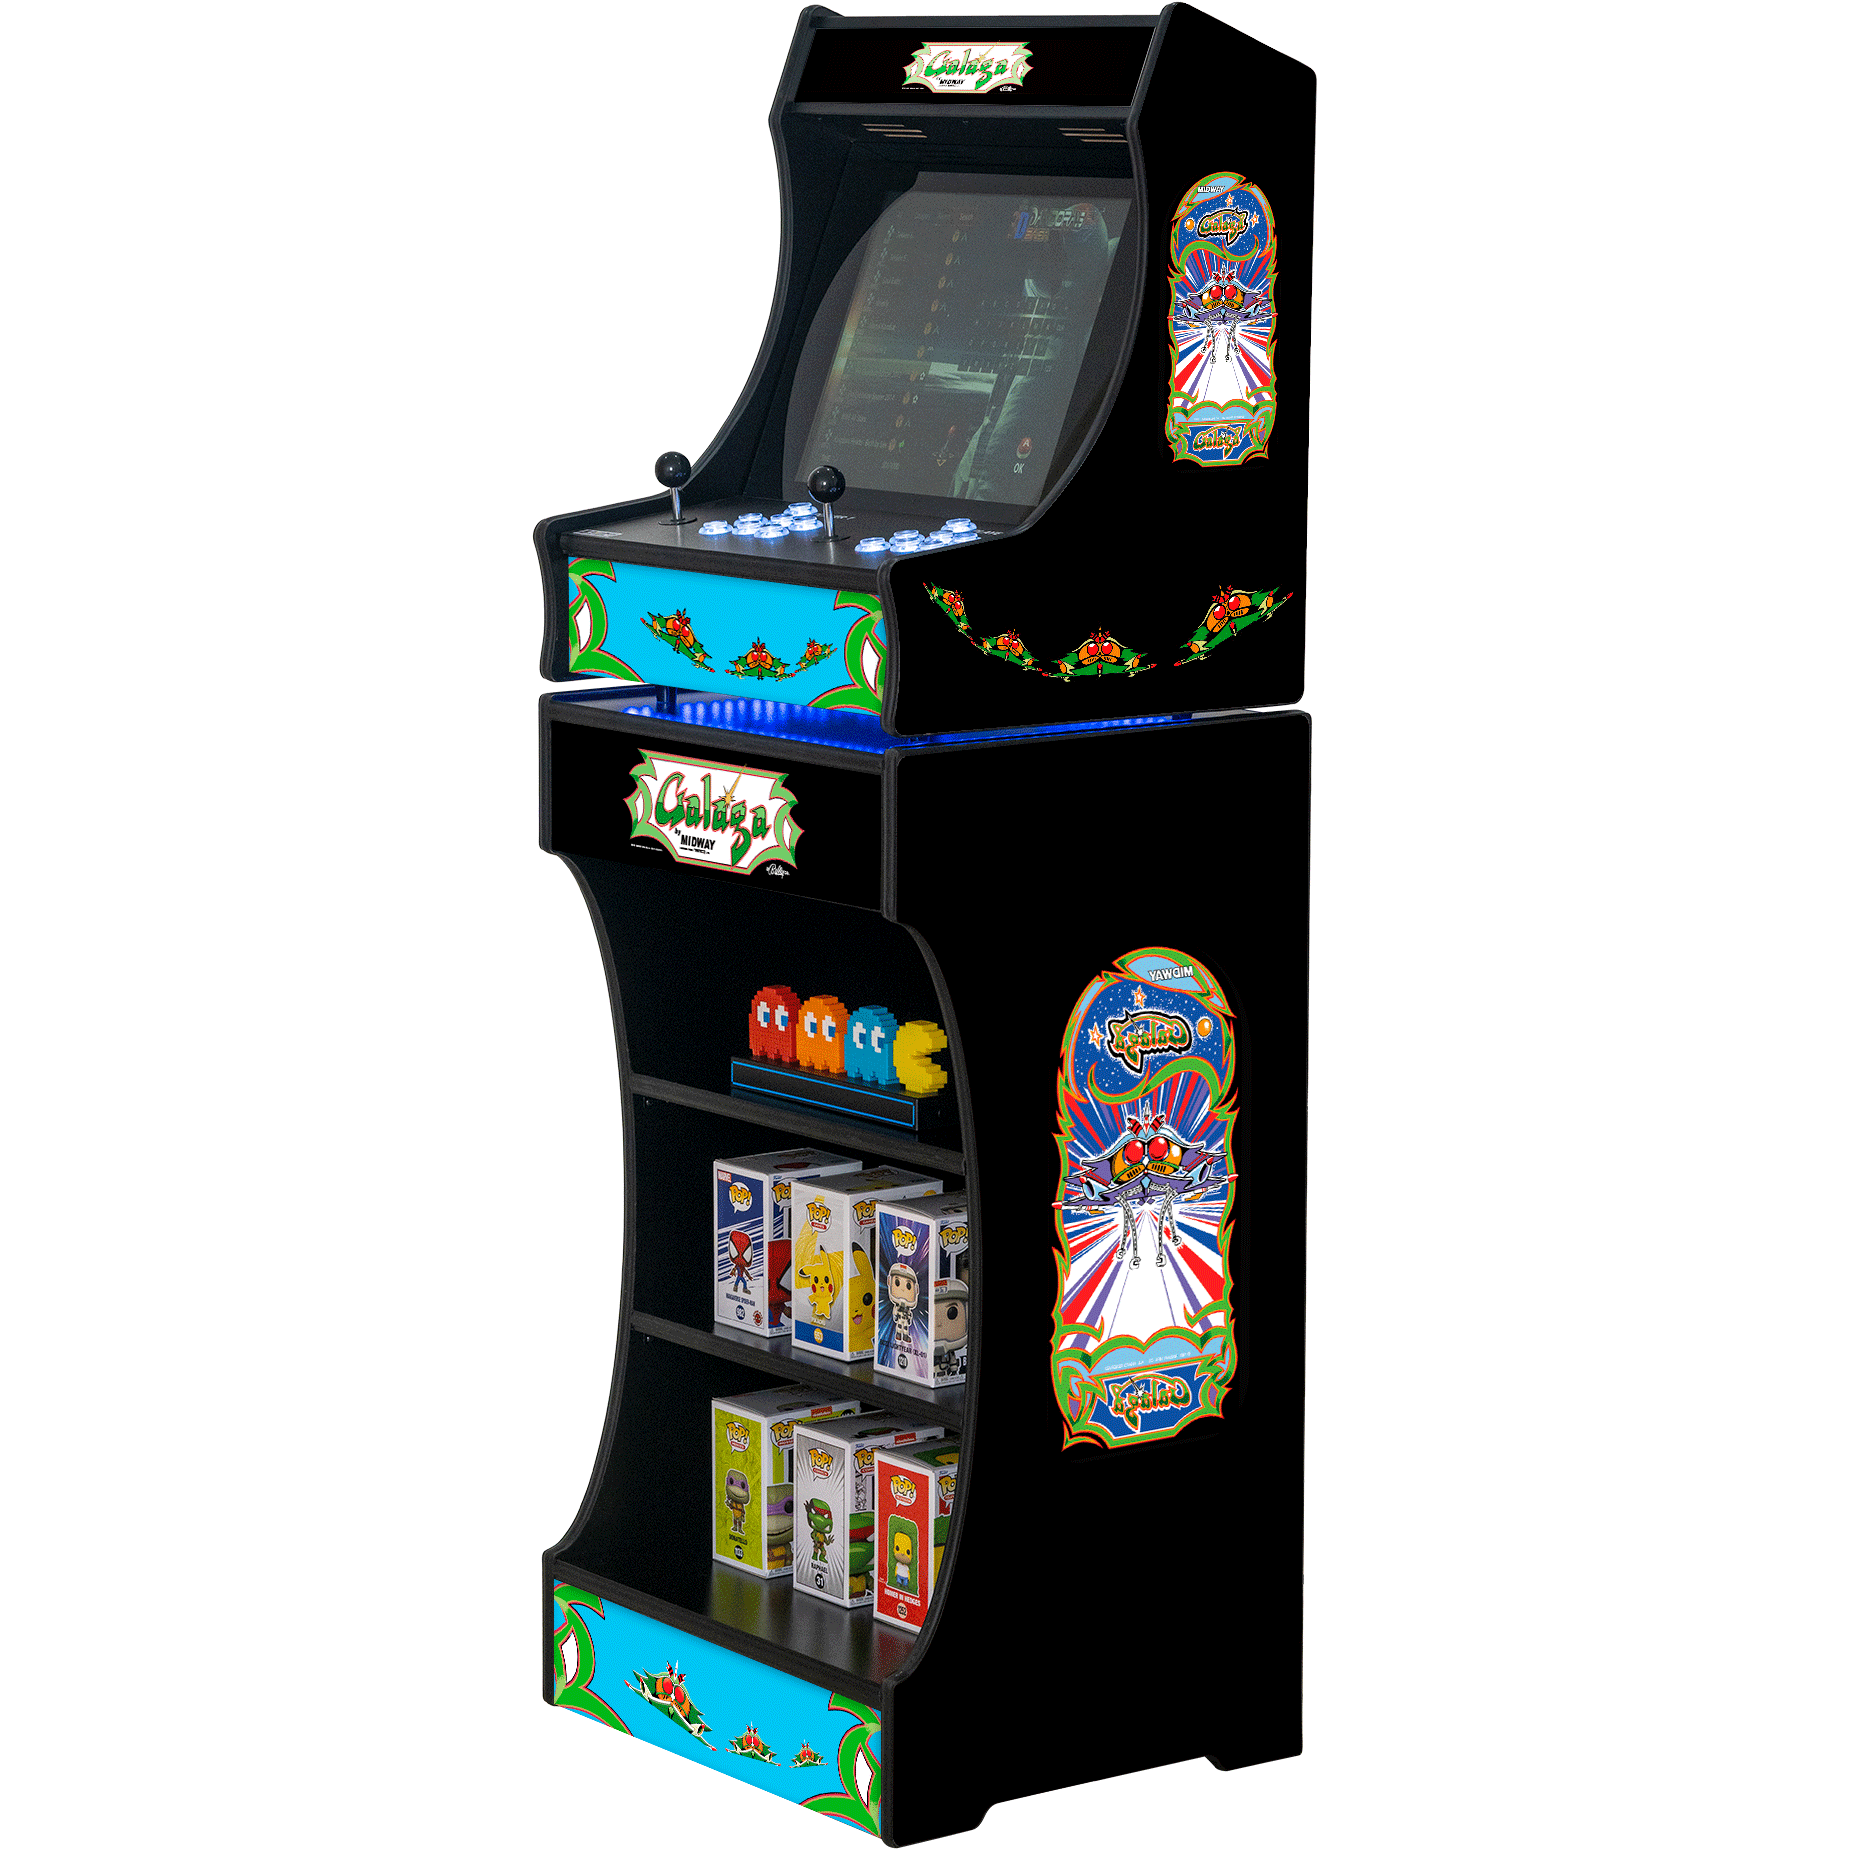 Upright 19 Inch Arcade Machine - 10,000 Games Included